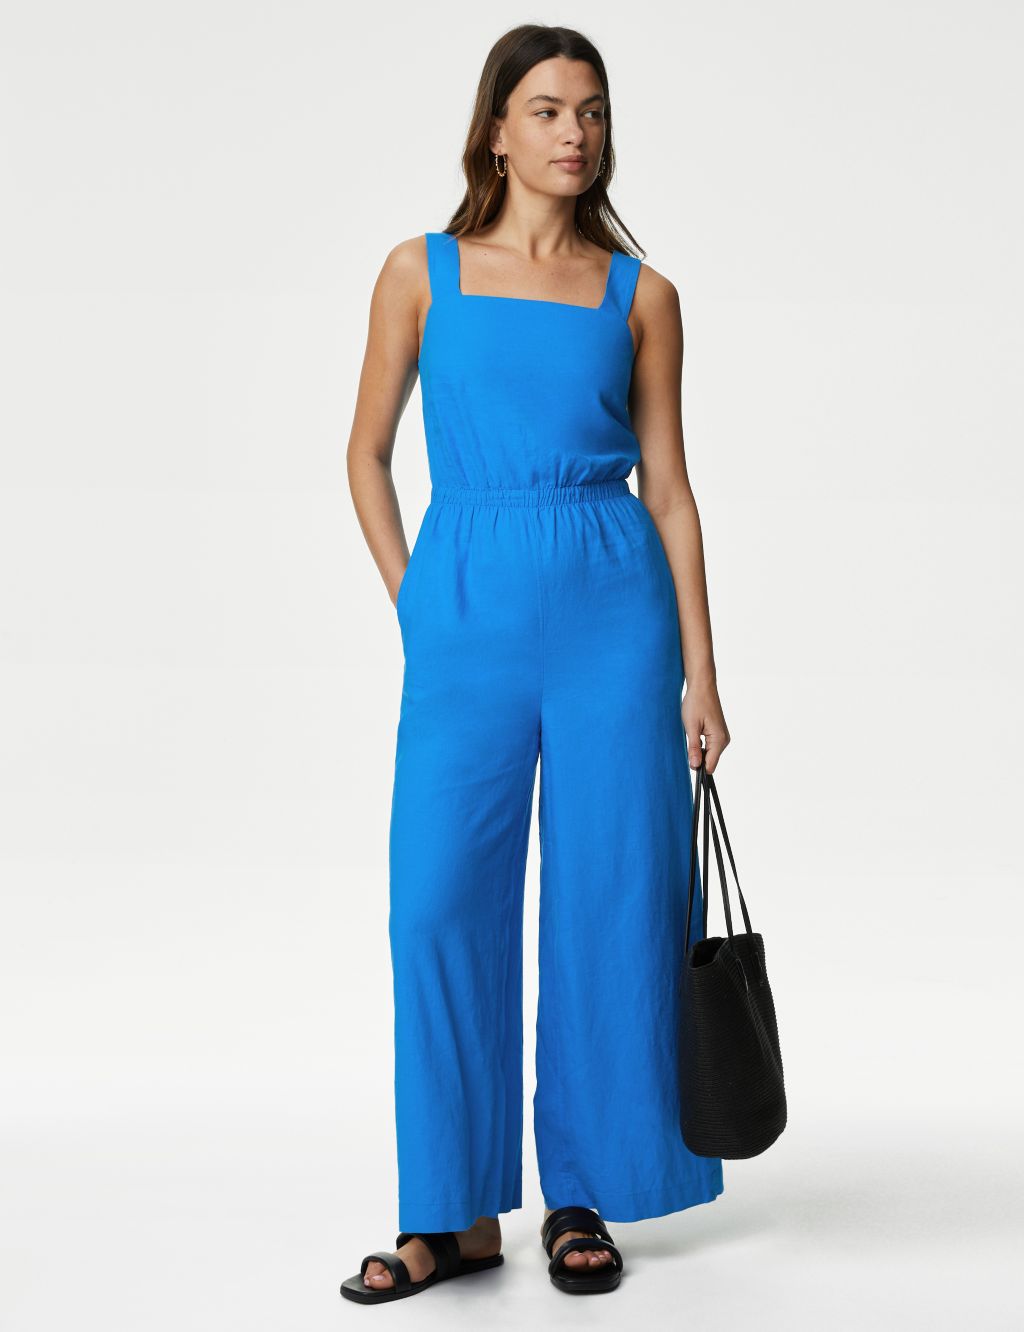 Dressy Jumpsuits for Women Wrap V Neck Sleeveless Collared Overalls High  Waist Pleated Wide Leg Long Pants Romper